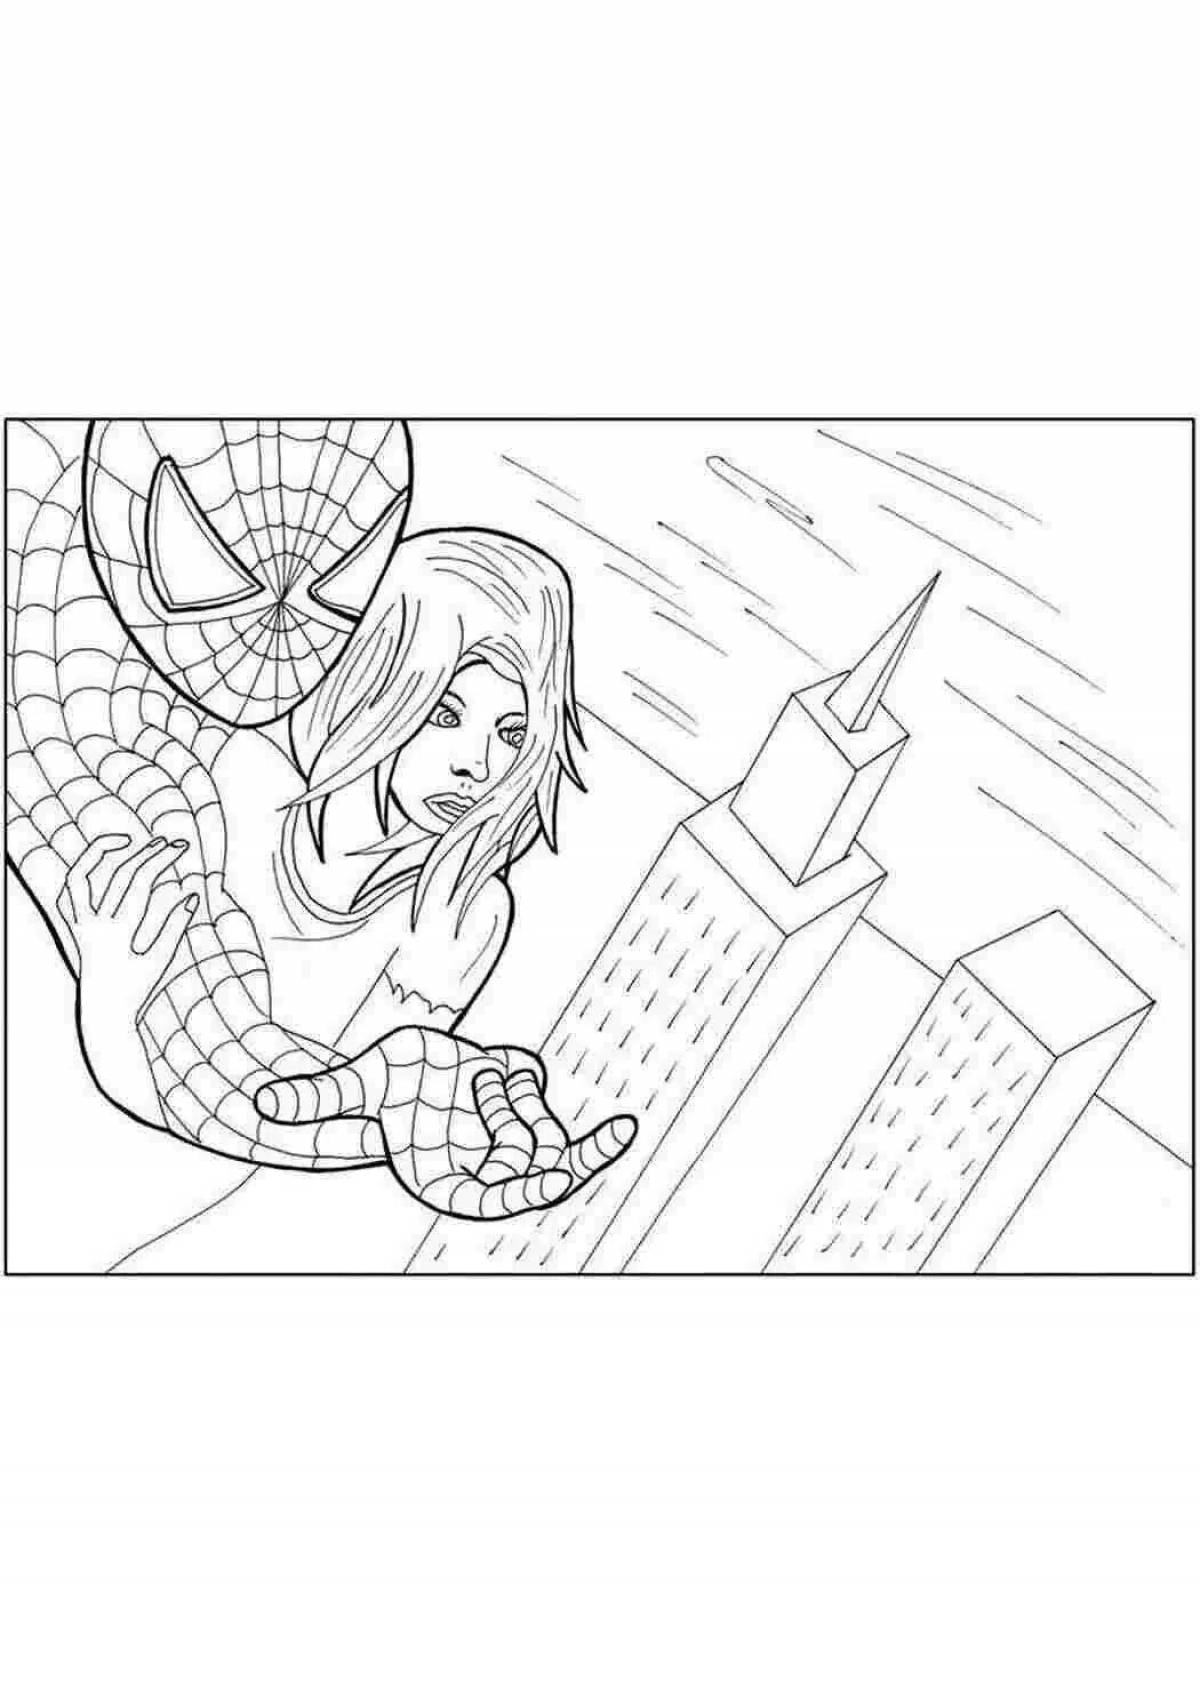 Colorful spiderman coloring page for girls